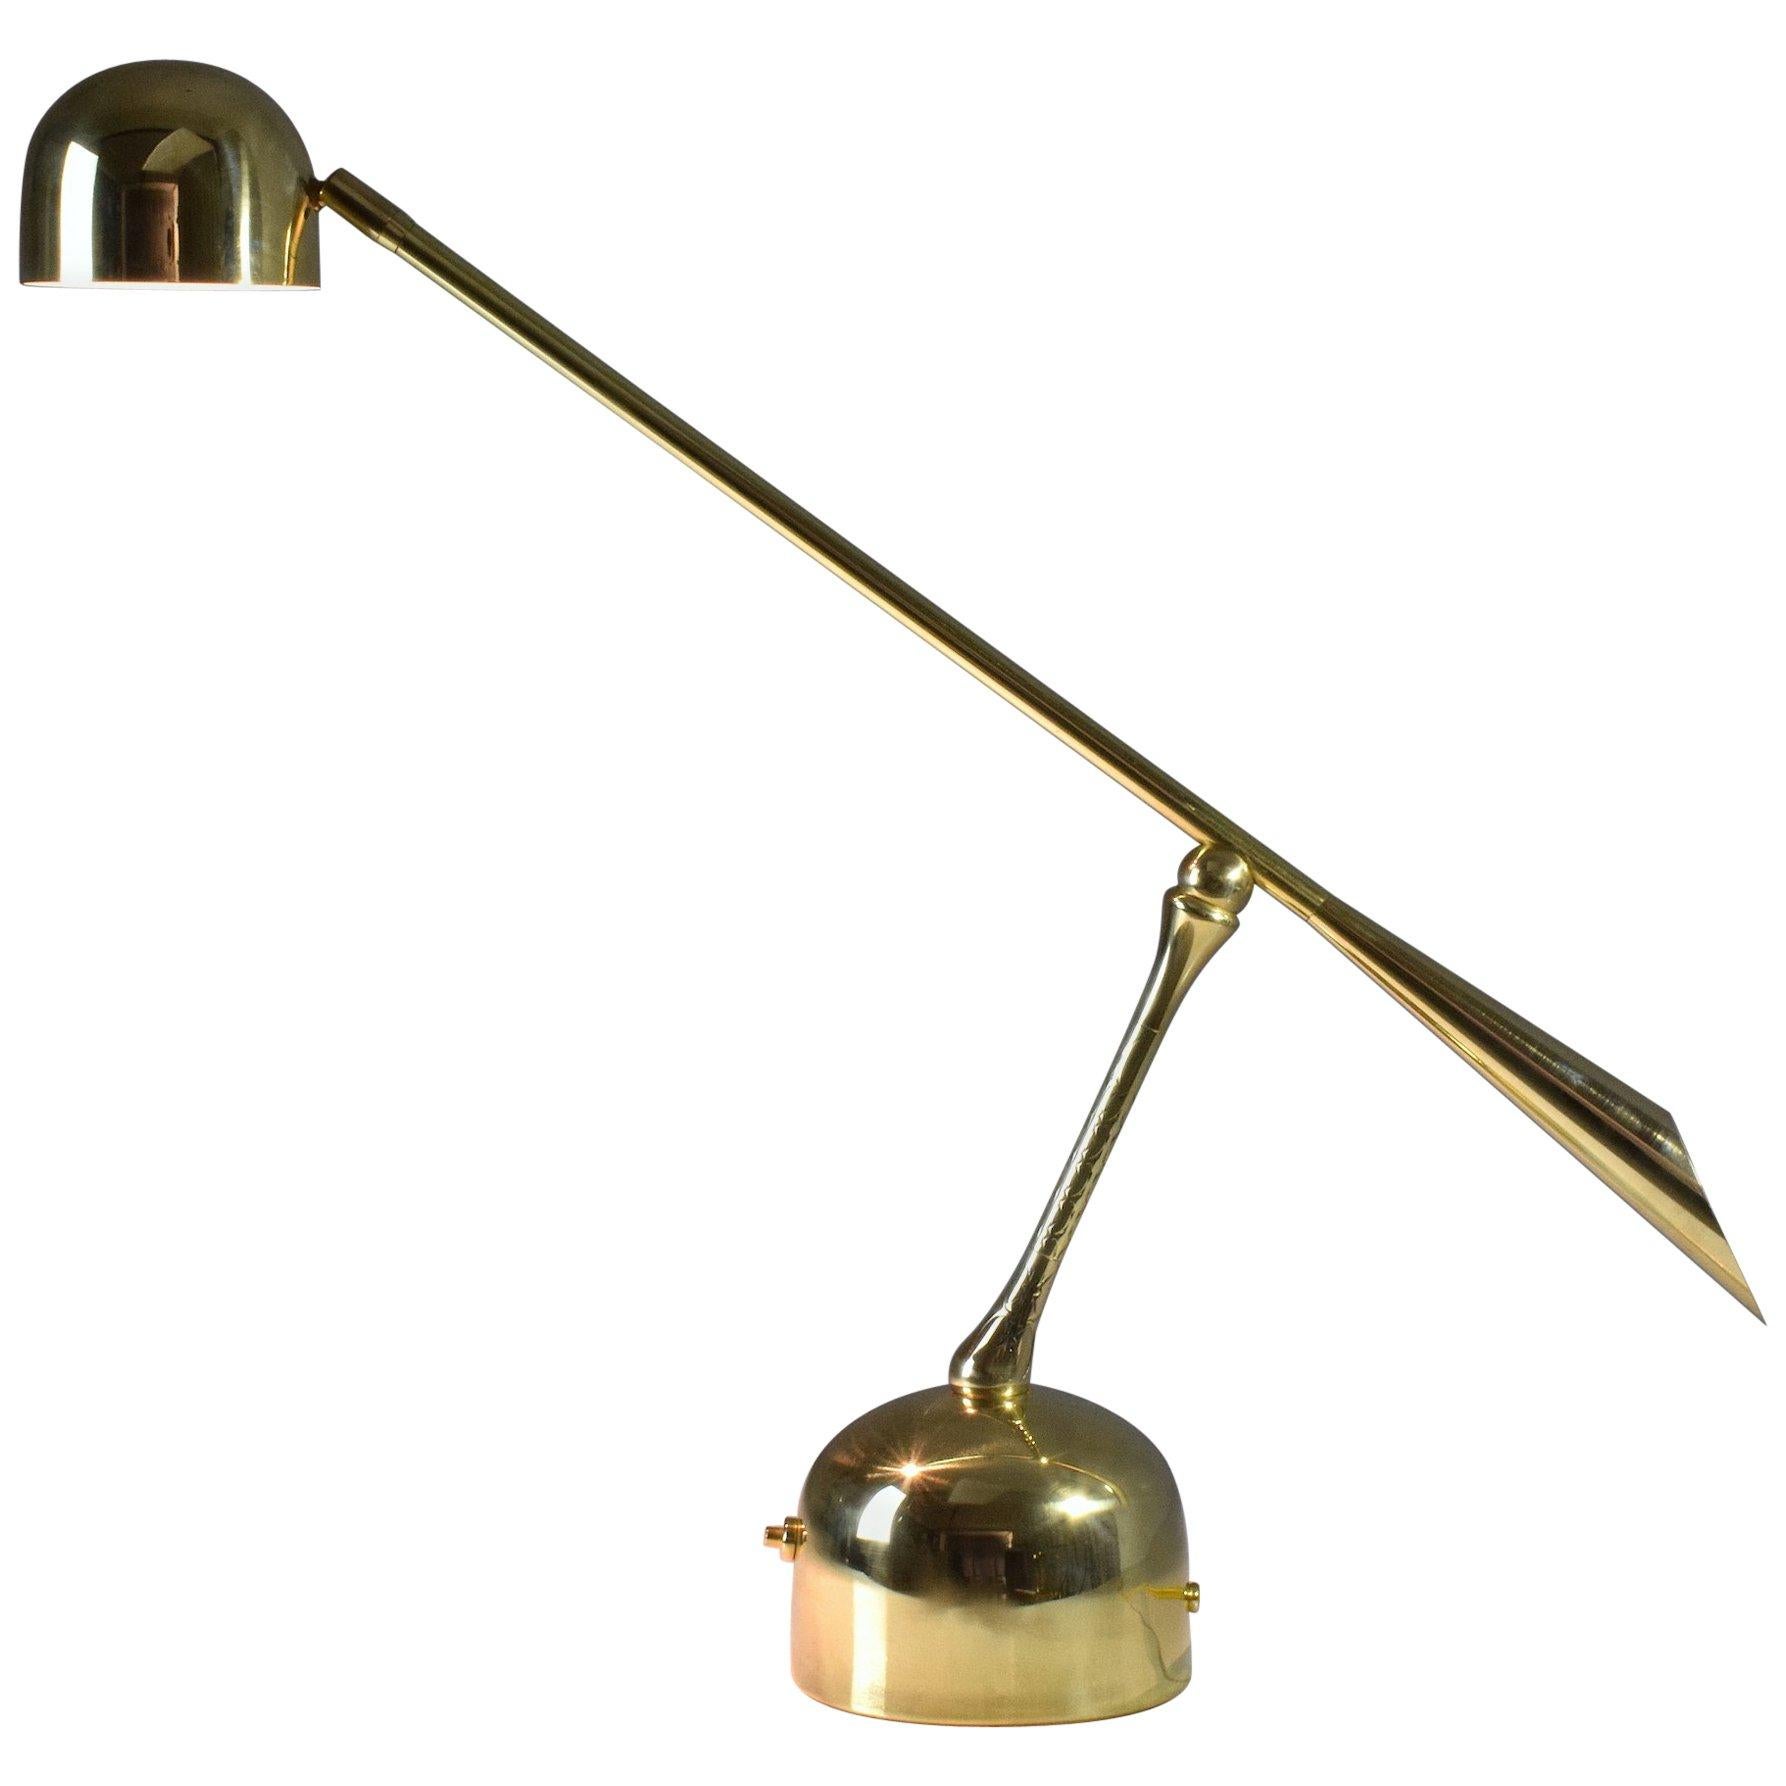 Continuum-II Contemporary Articulating Brass Table Lamp, Flow Collection